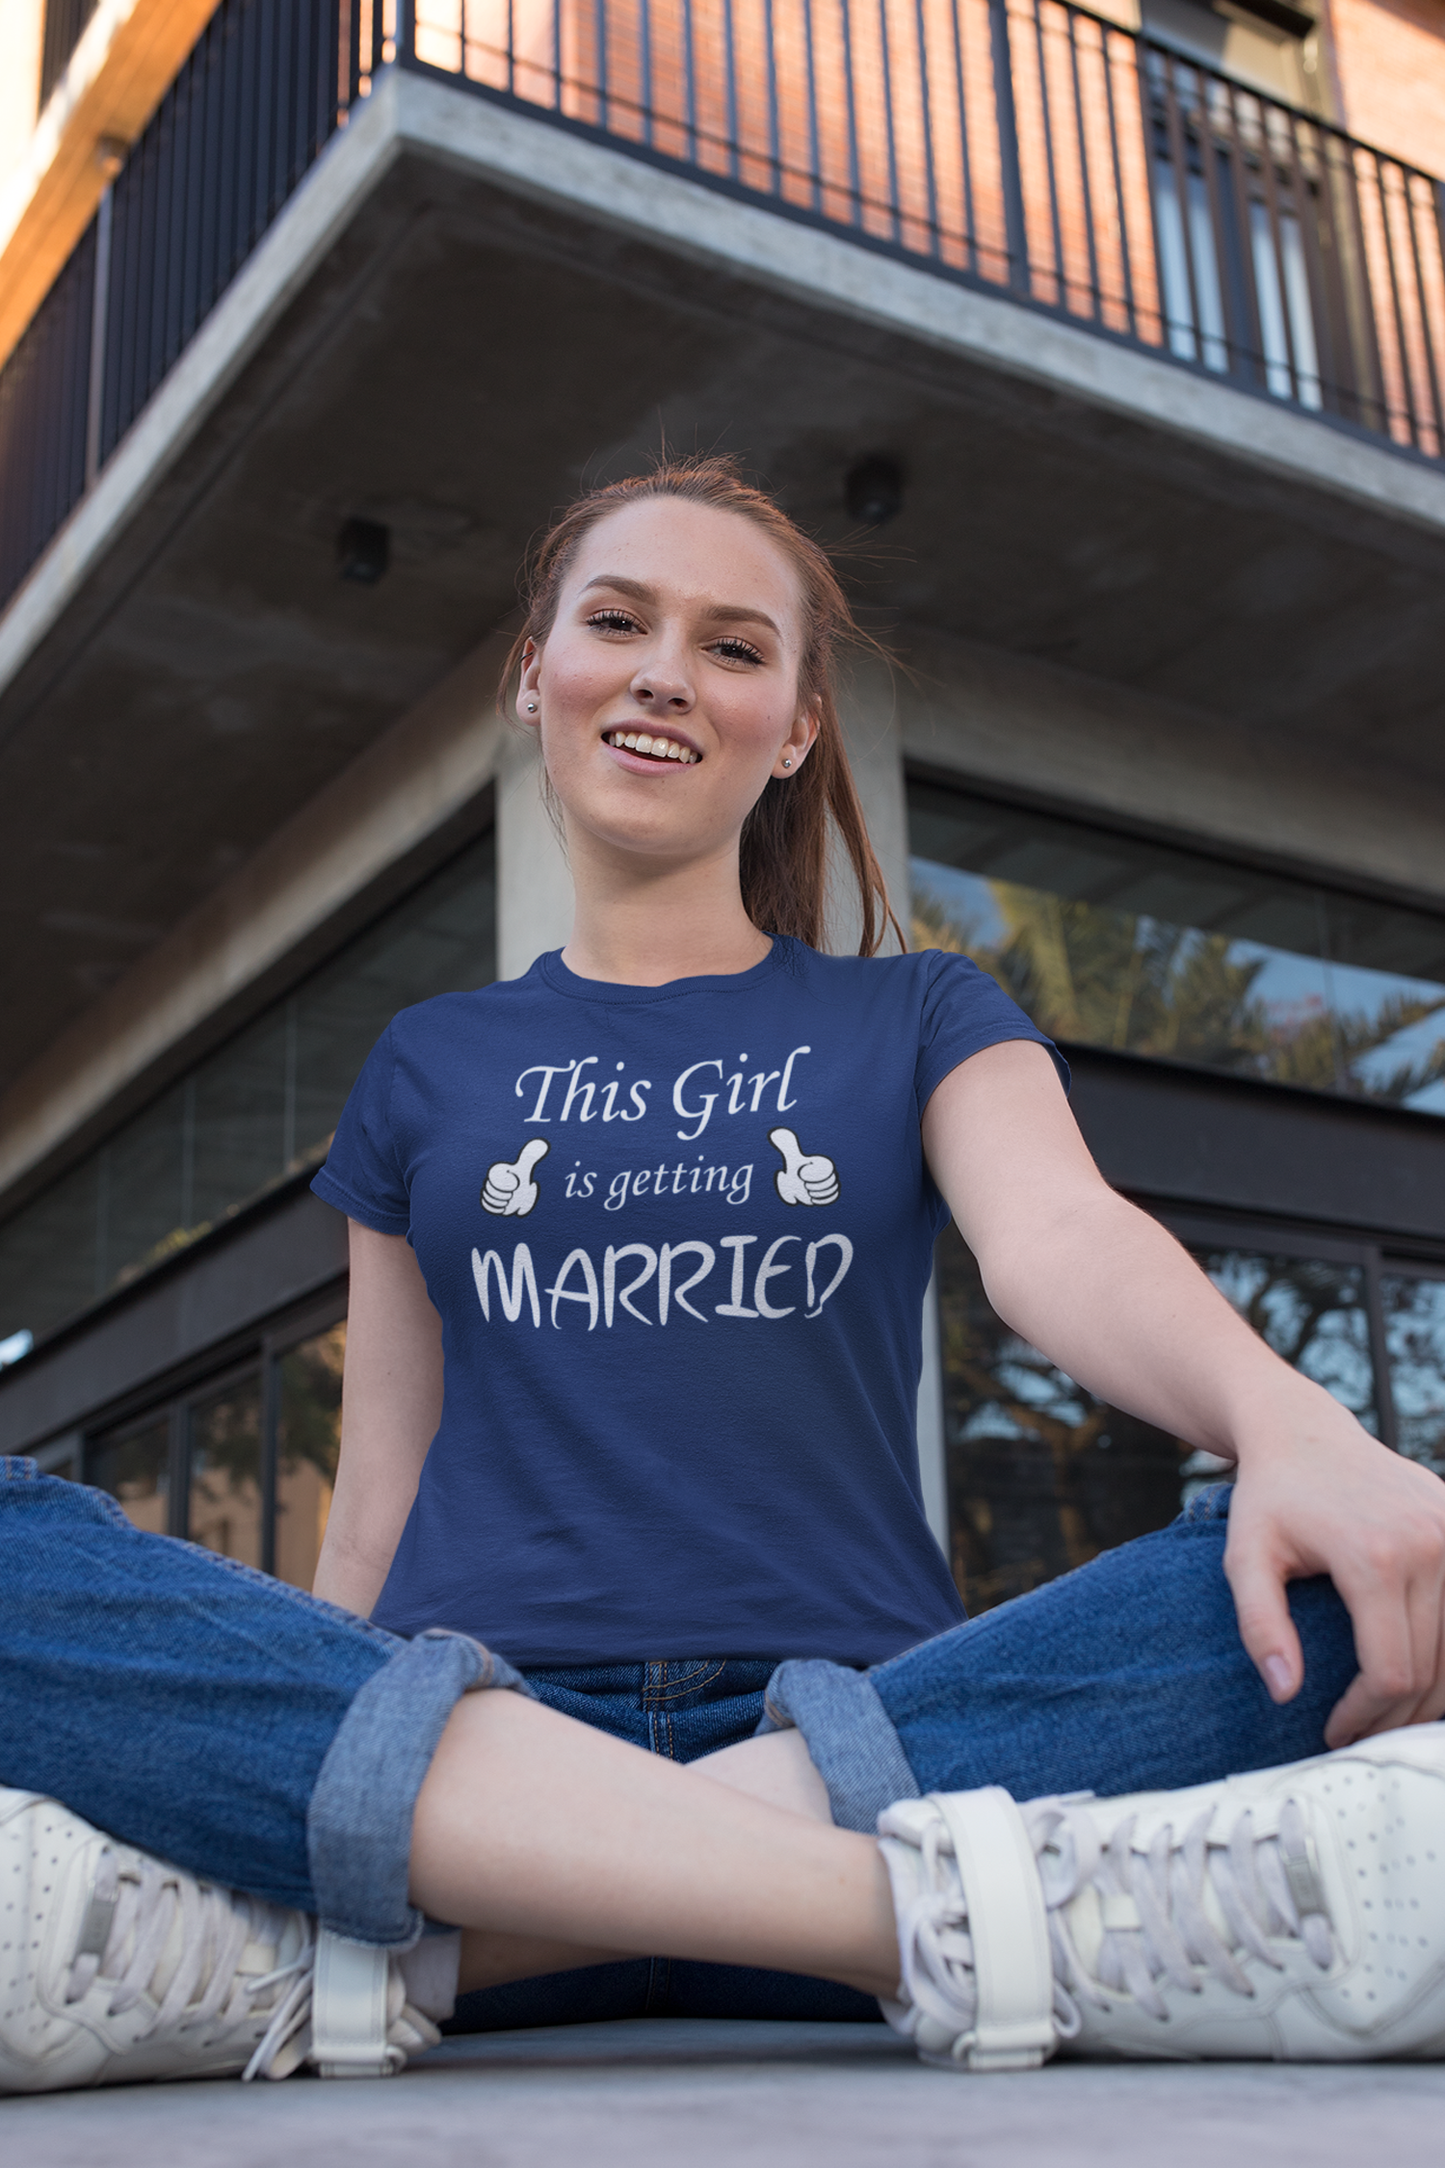 This Guy/ Girl Is Getting Married | Couple T Shirts For Pre Wedding Shoot